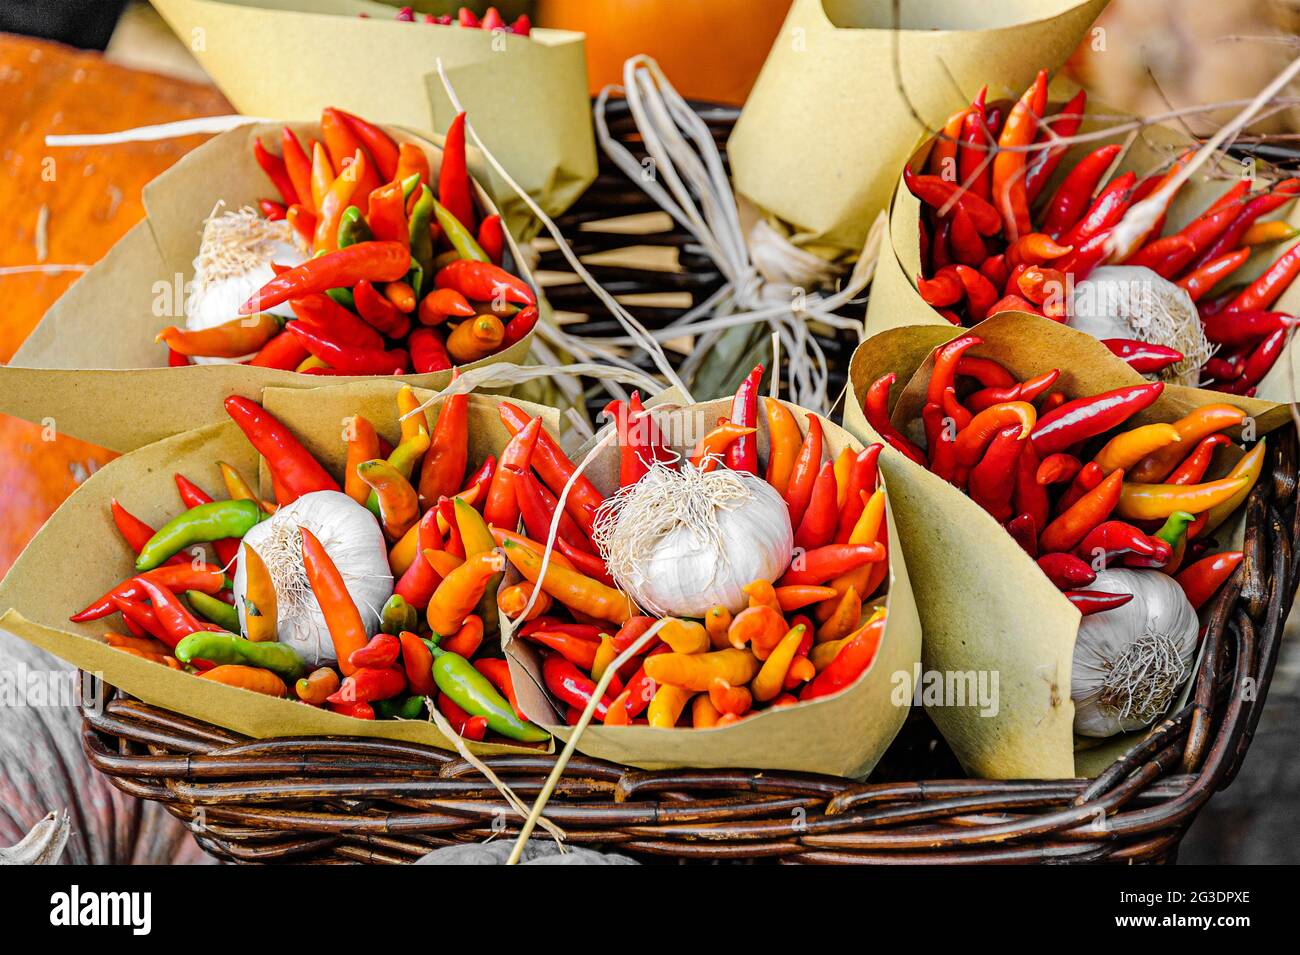 Bunches of colorful chili peppers with a garlic bulb in brown paper wrapping, inside a rattan basket. Stock Photo